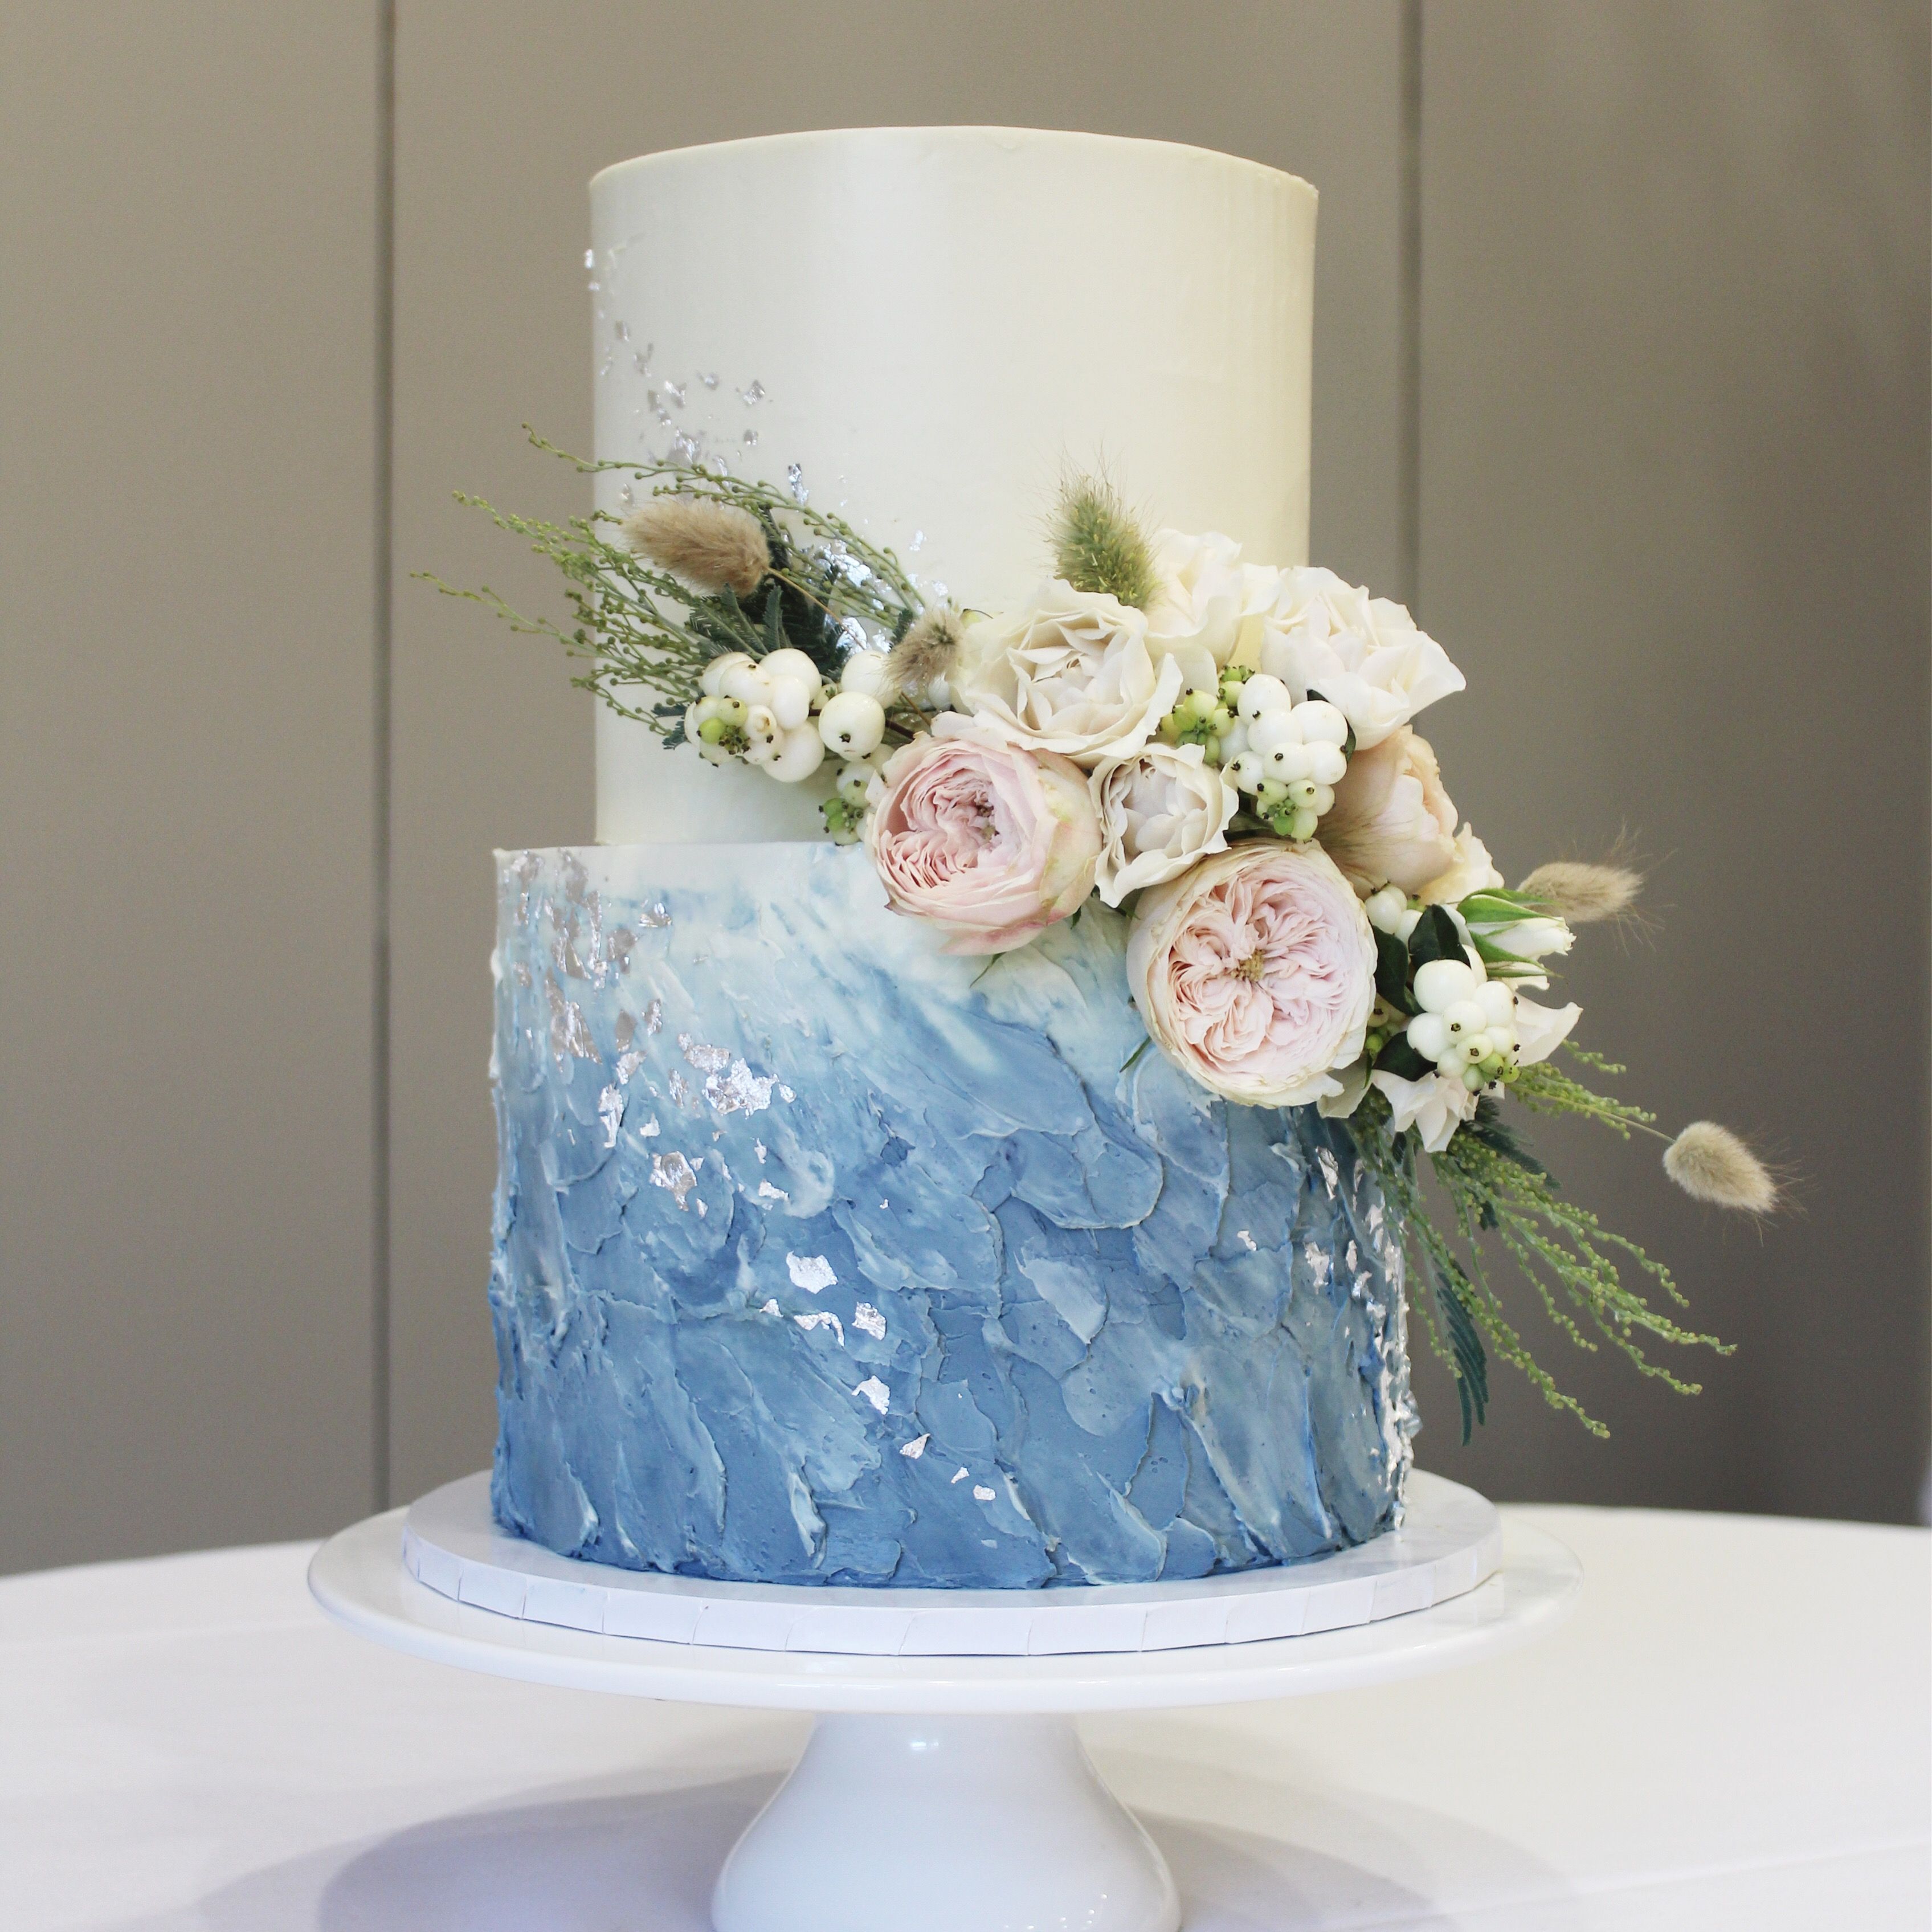 Powder blue and white buttercream wedding cake with silver foil -   17 wedding Cakes blue ideas